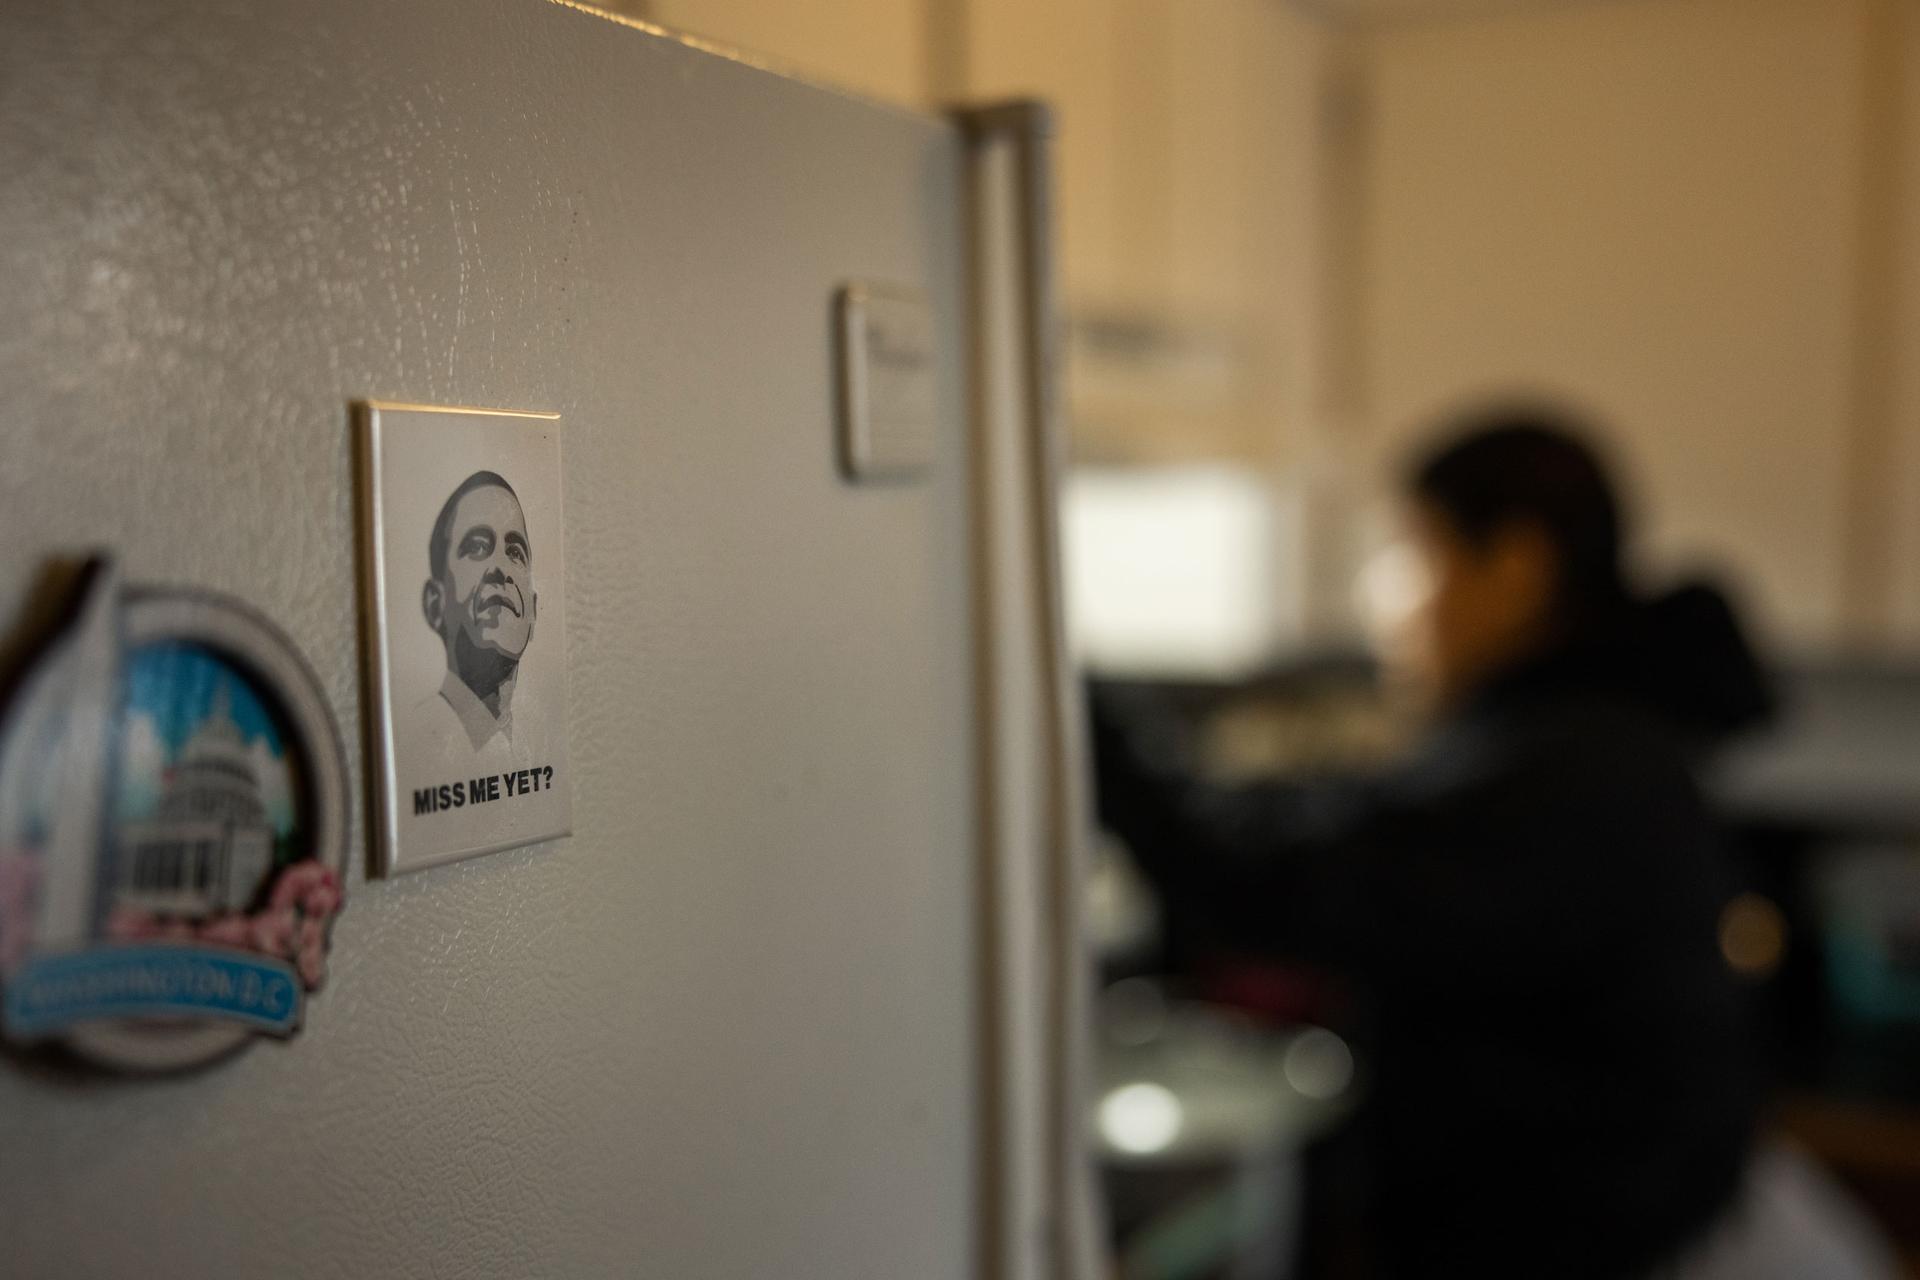 A magnet with a portrait of President Barack Obama is shown with a woman in the distance in soft focus.